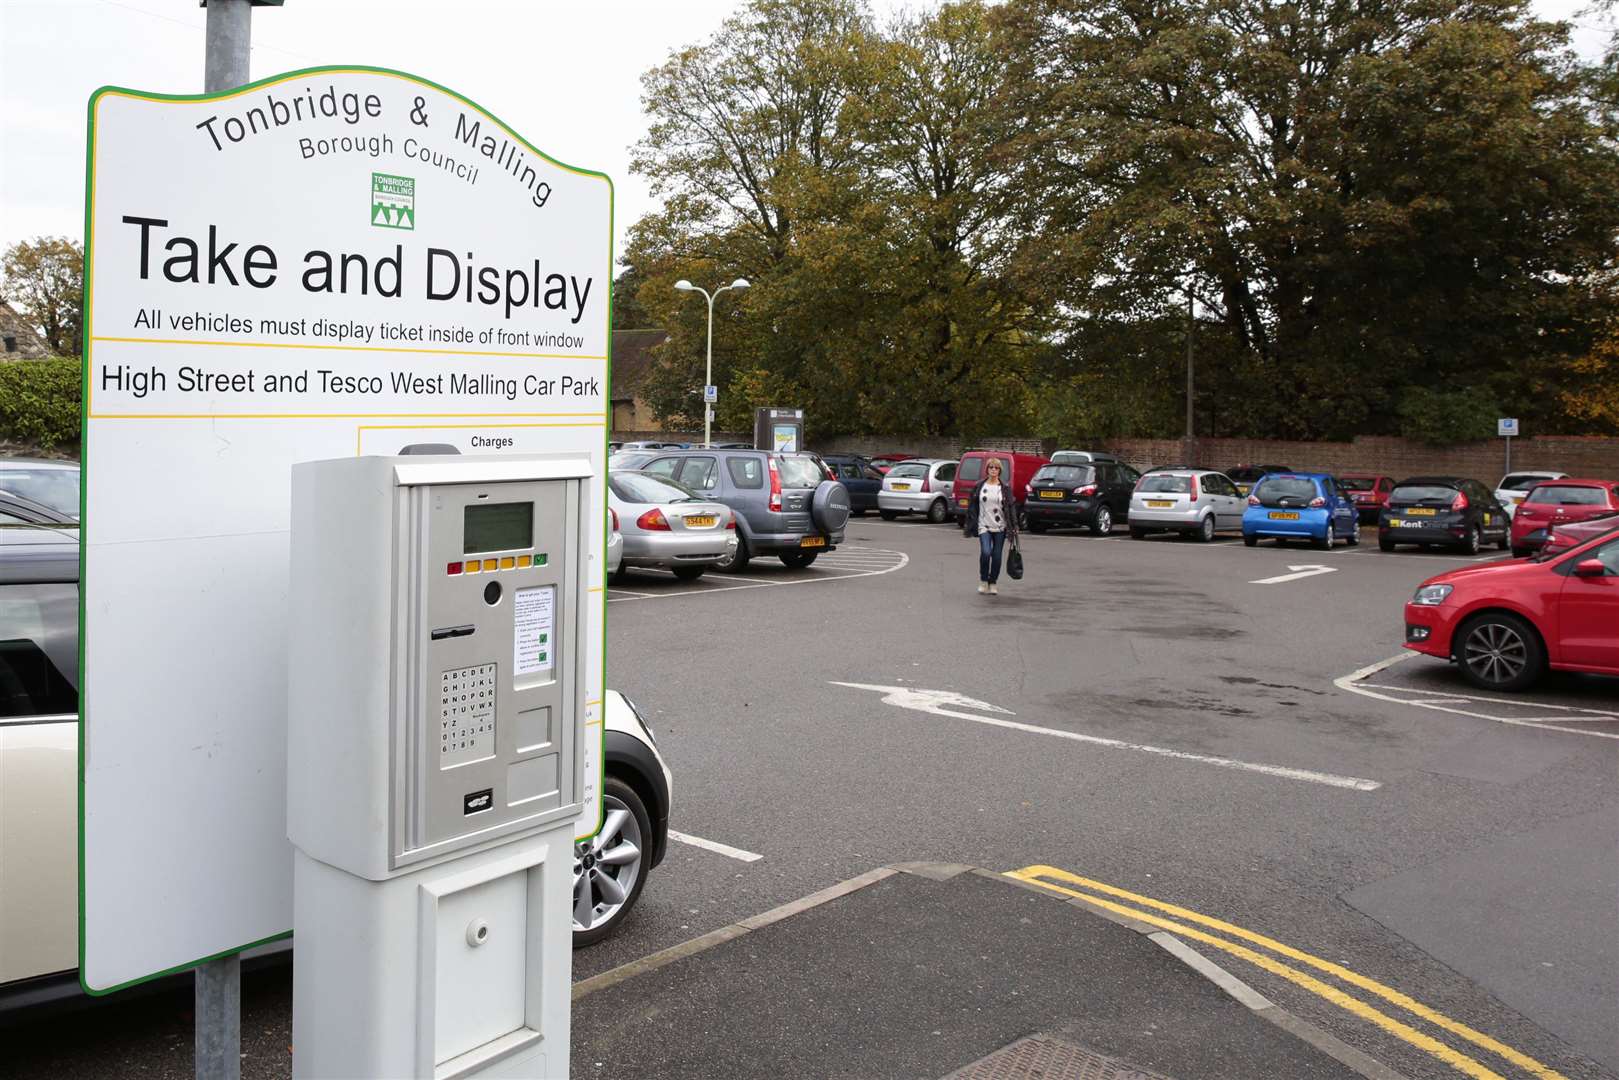 Car parking charges could also rise after the consultation